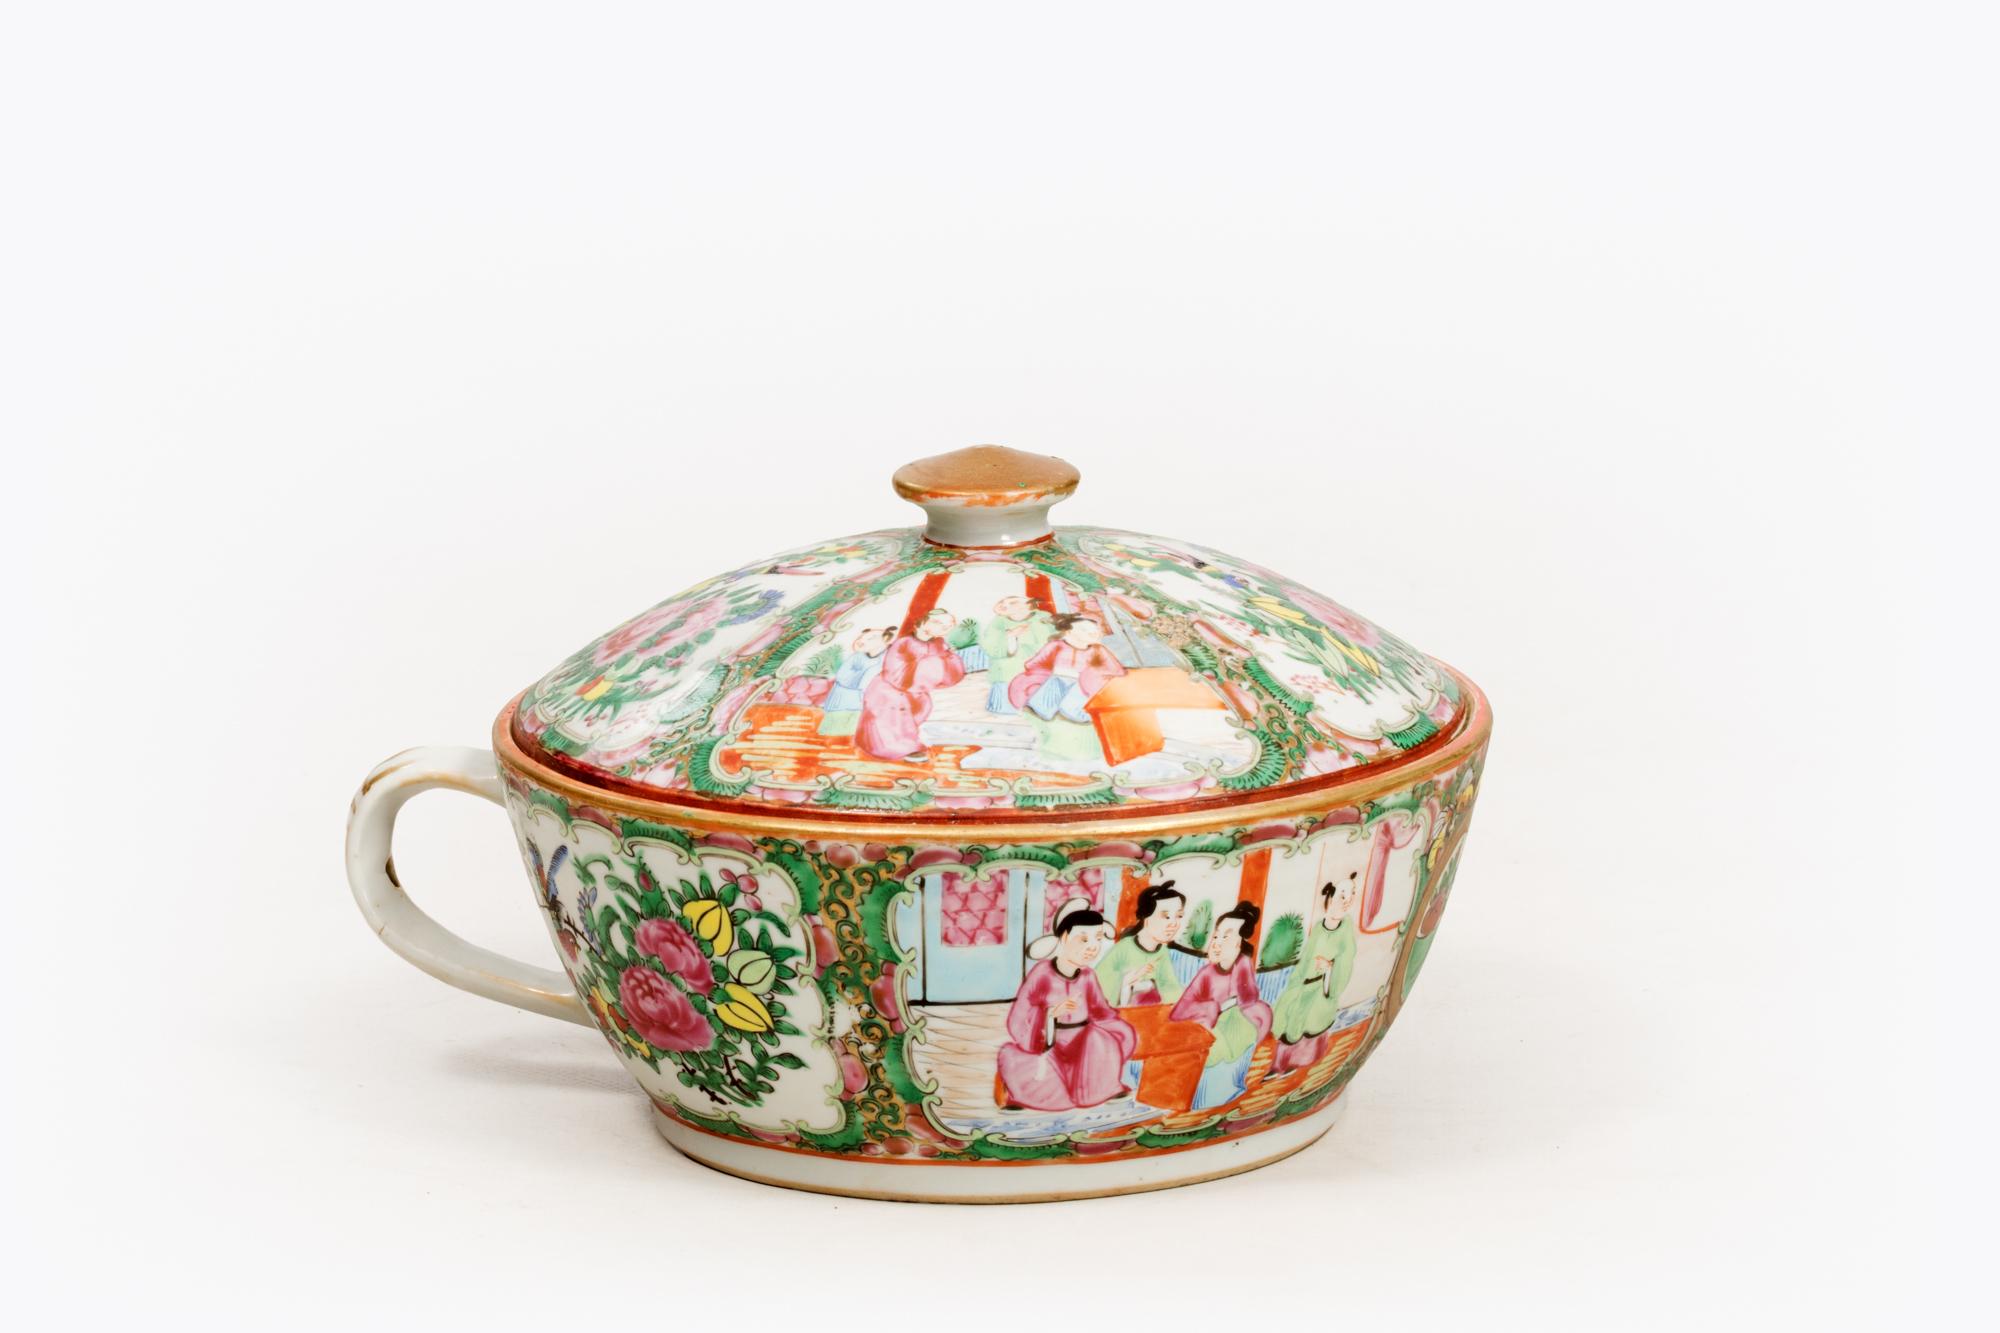 19th Century Canton Chinese Export Rose Medallion porcelain chestnut bowl with lid featuring painted interior scenes of figures, birds and flowers with gilt highlights and raised enamel detail throughout.

Popular amongst the French aristocracy,